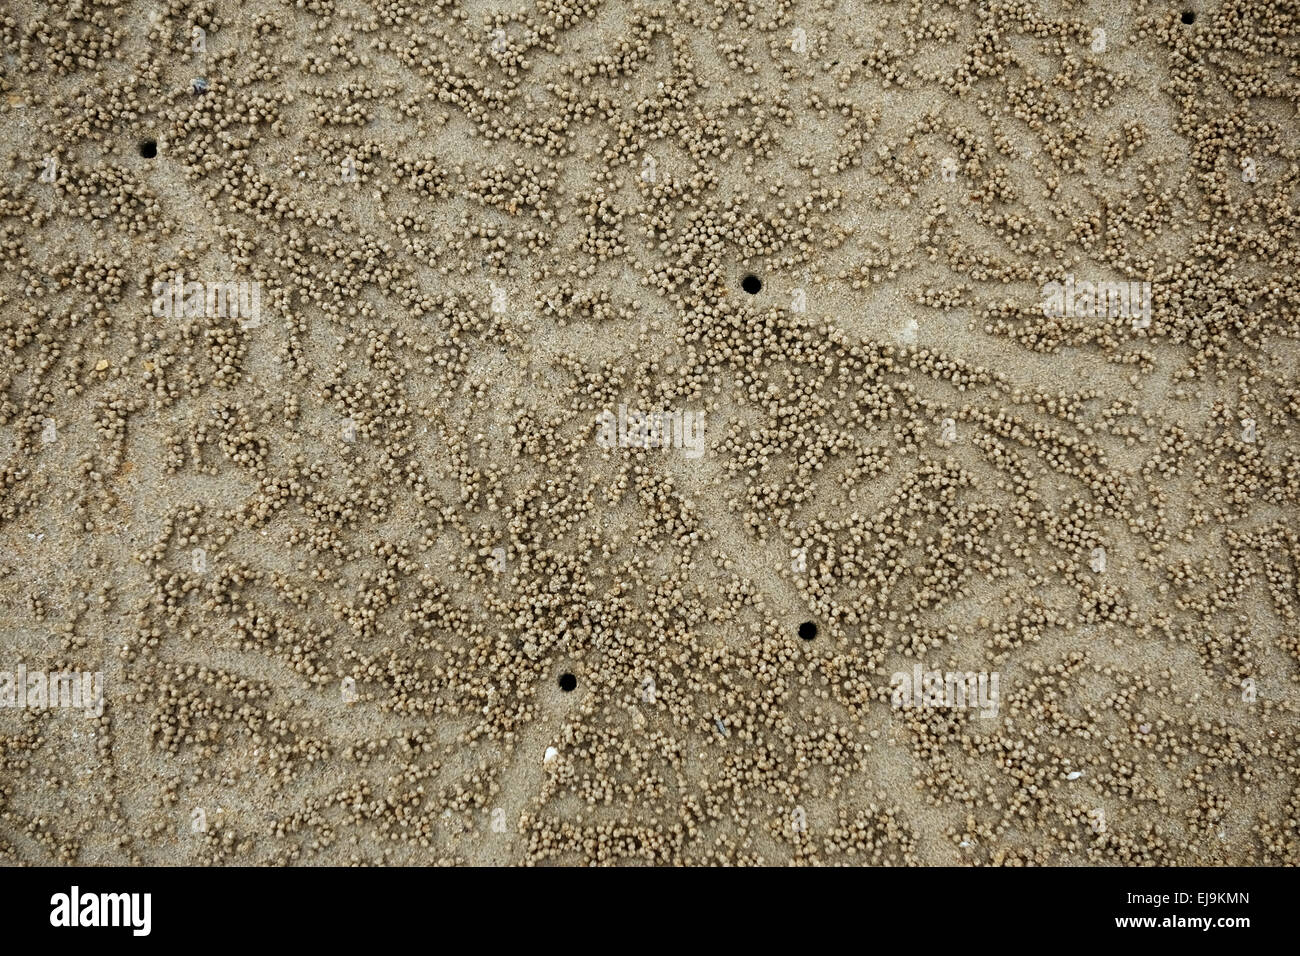 Patterns formed by balls and escape holes created by sand bubbler crabs, Scopimera spp., at low tide on a beach near Krabi on th Stock Photo